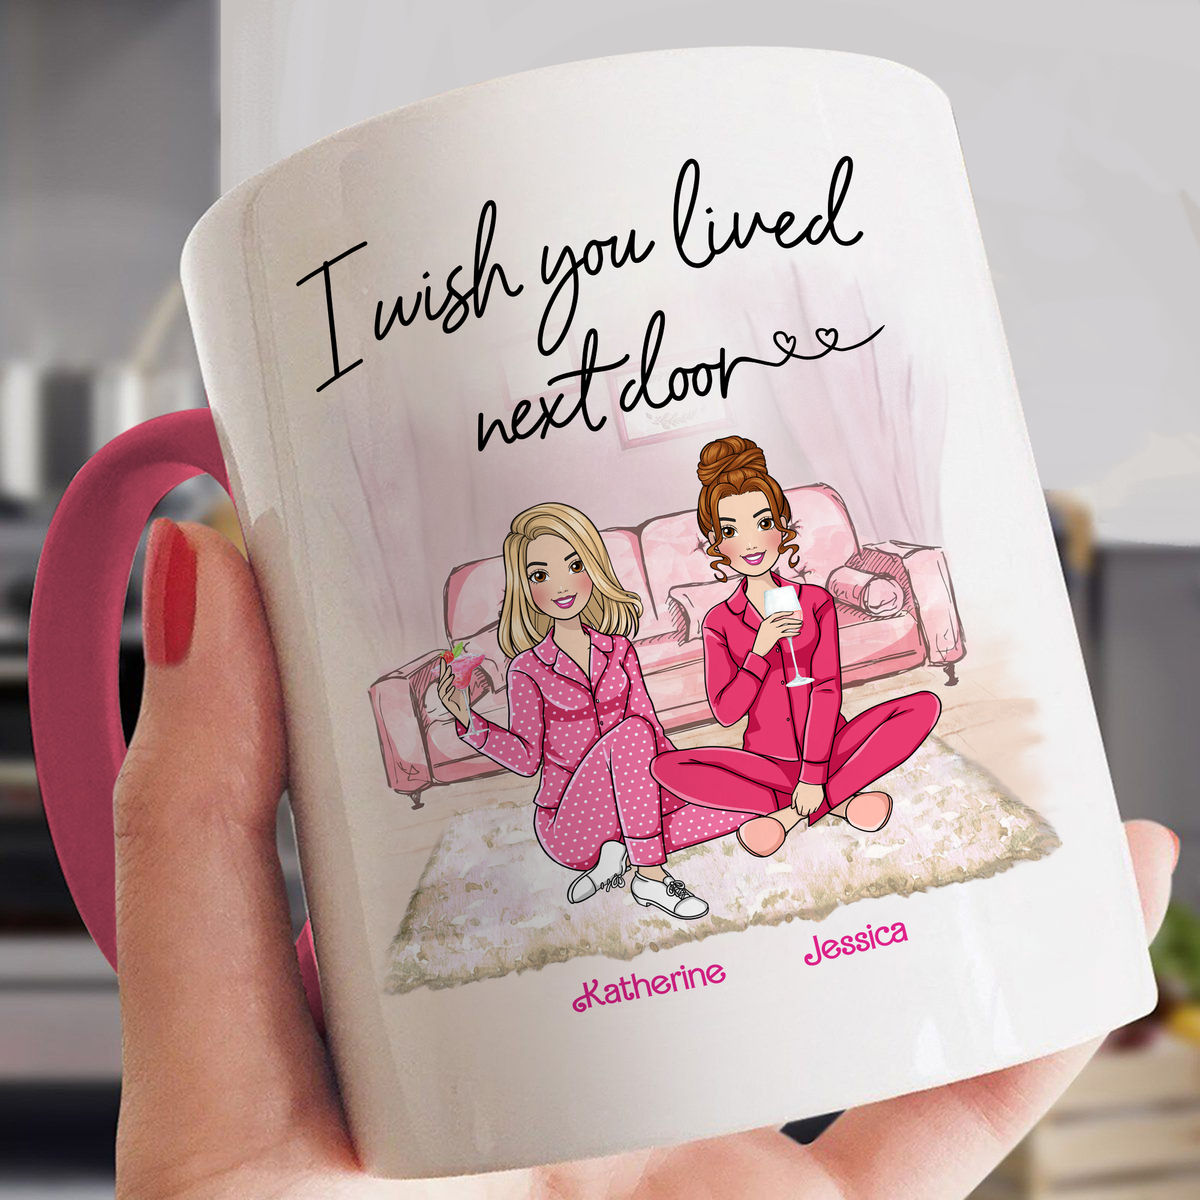 Personalized Mug - Sisters Mug - I wish you lived next door - Gift for sisters, gift for birthday, gift for her, gift for friends_2